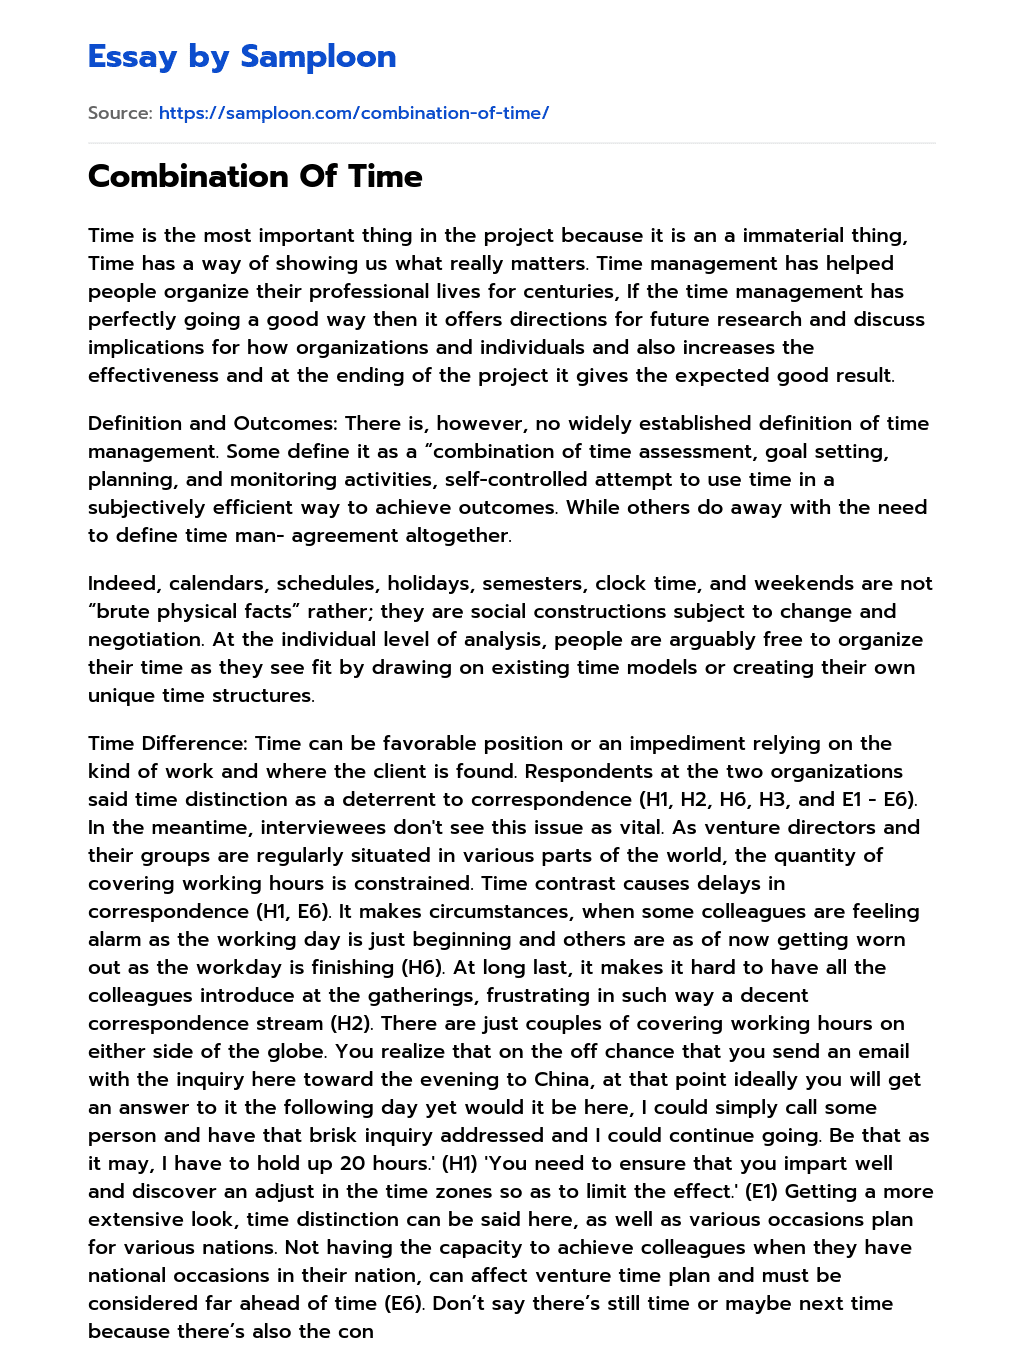 Combination Of Time essay